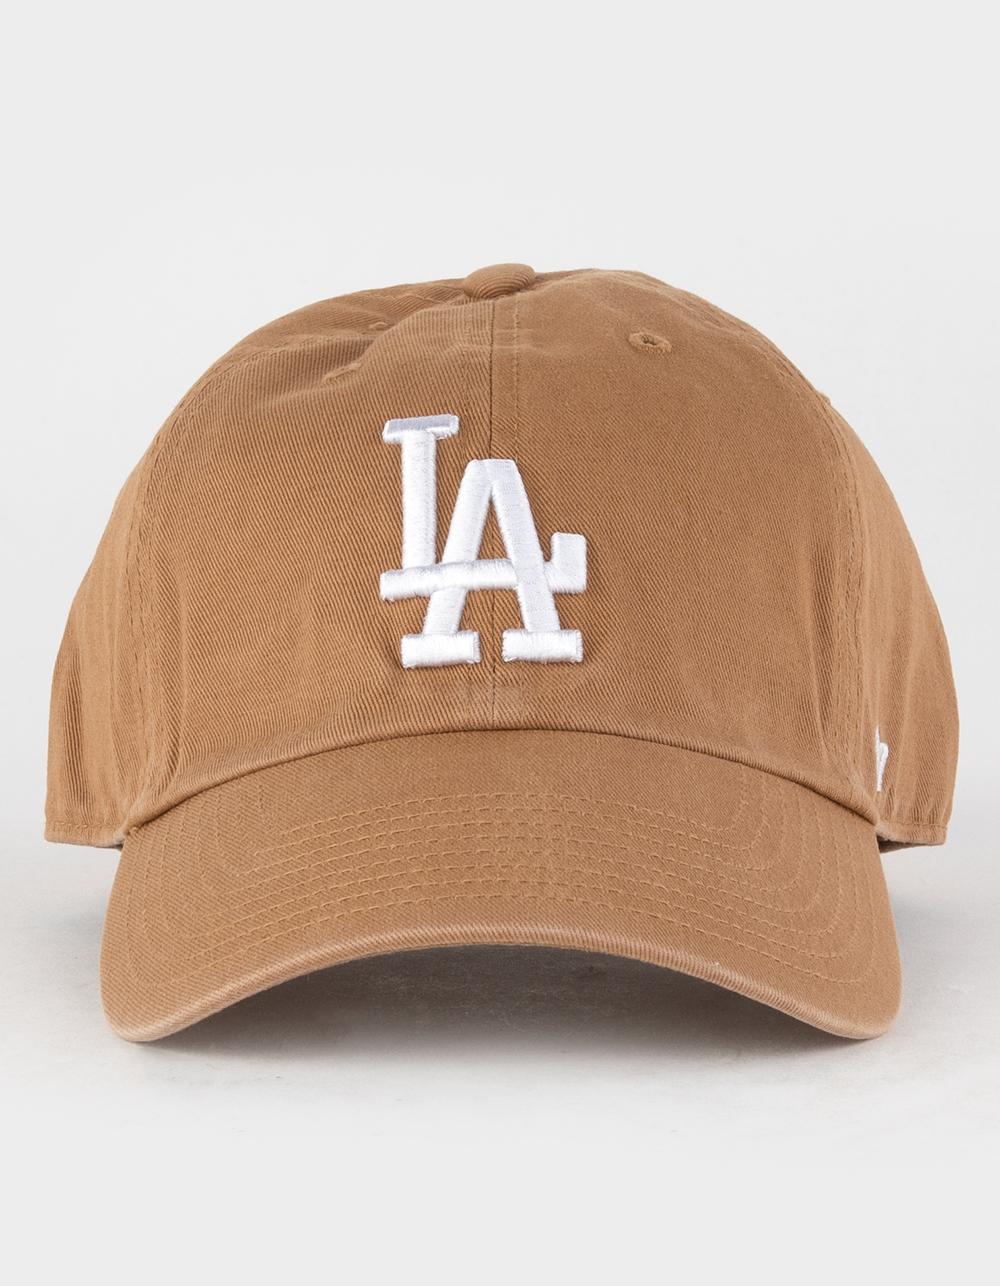 Los Angeles Dodgers - Royal Clean Up Hat, 47 Brand